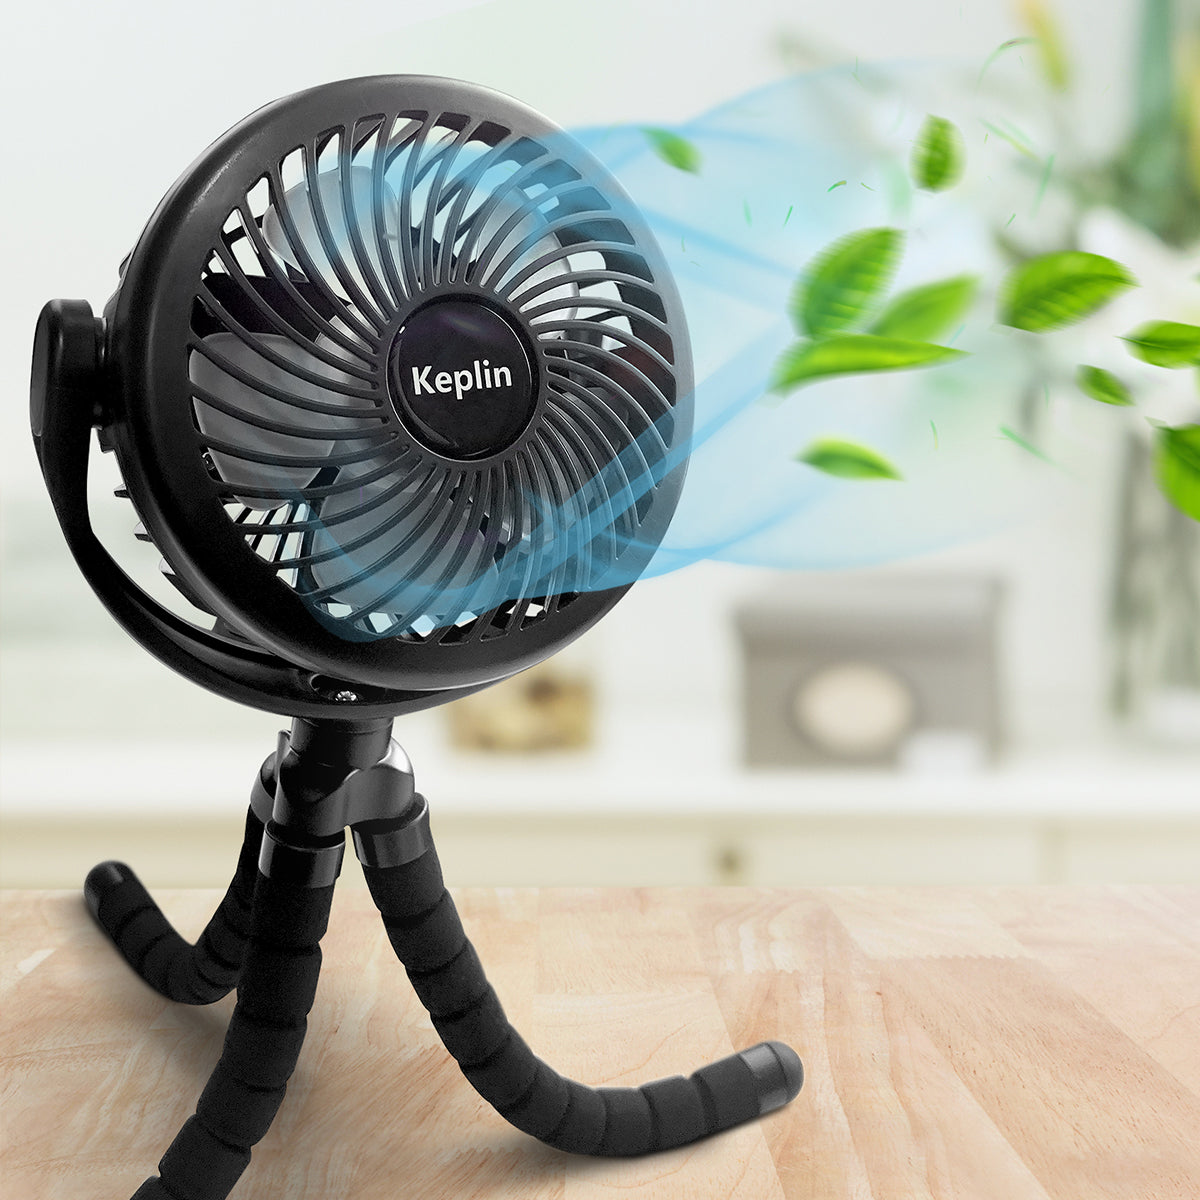 Beat the Heat with Cool Cooling Options - Air Quality - UK